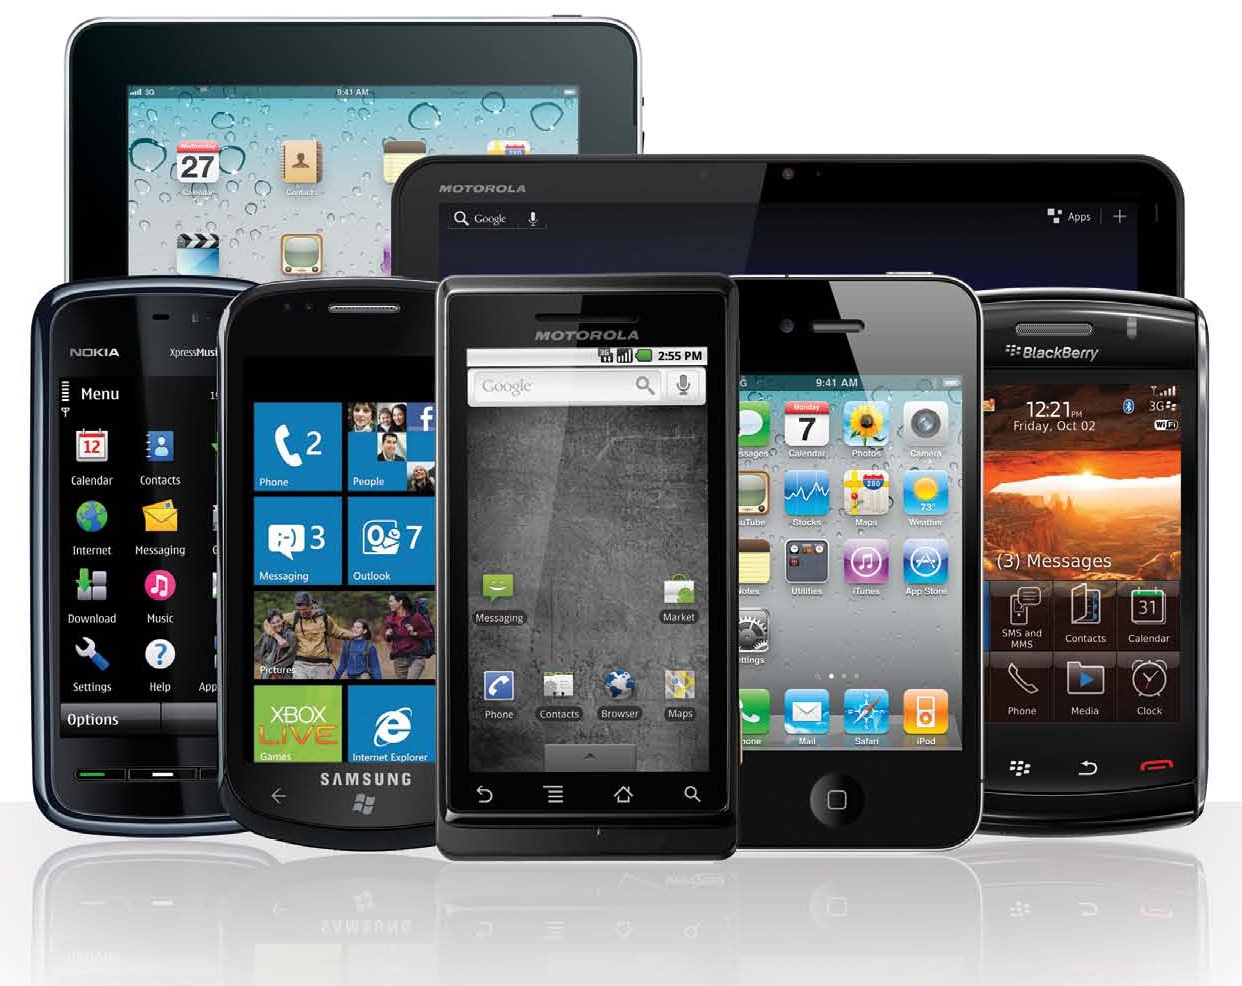 IDC: Android, iOS Devices Dominate, But Windows Phone Gains Ground